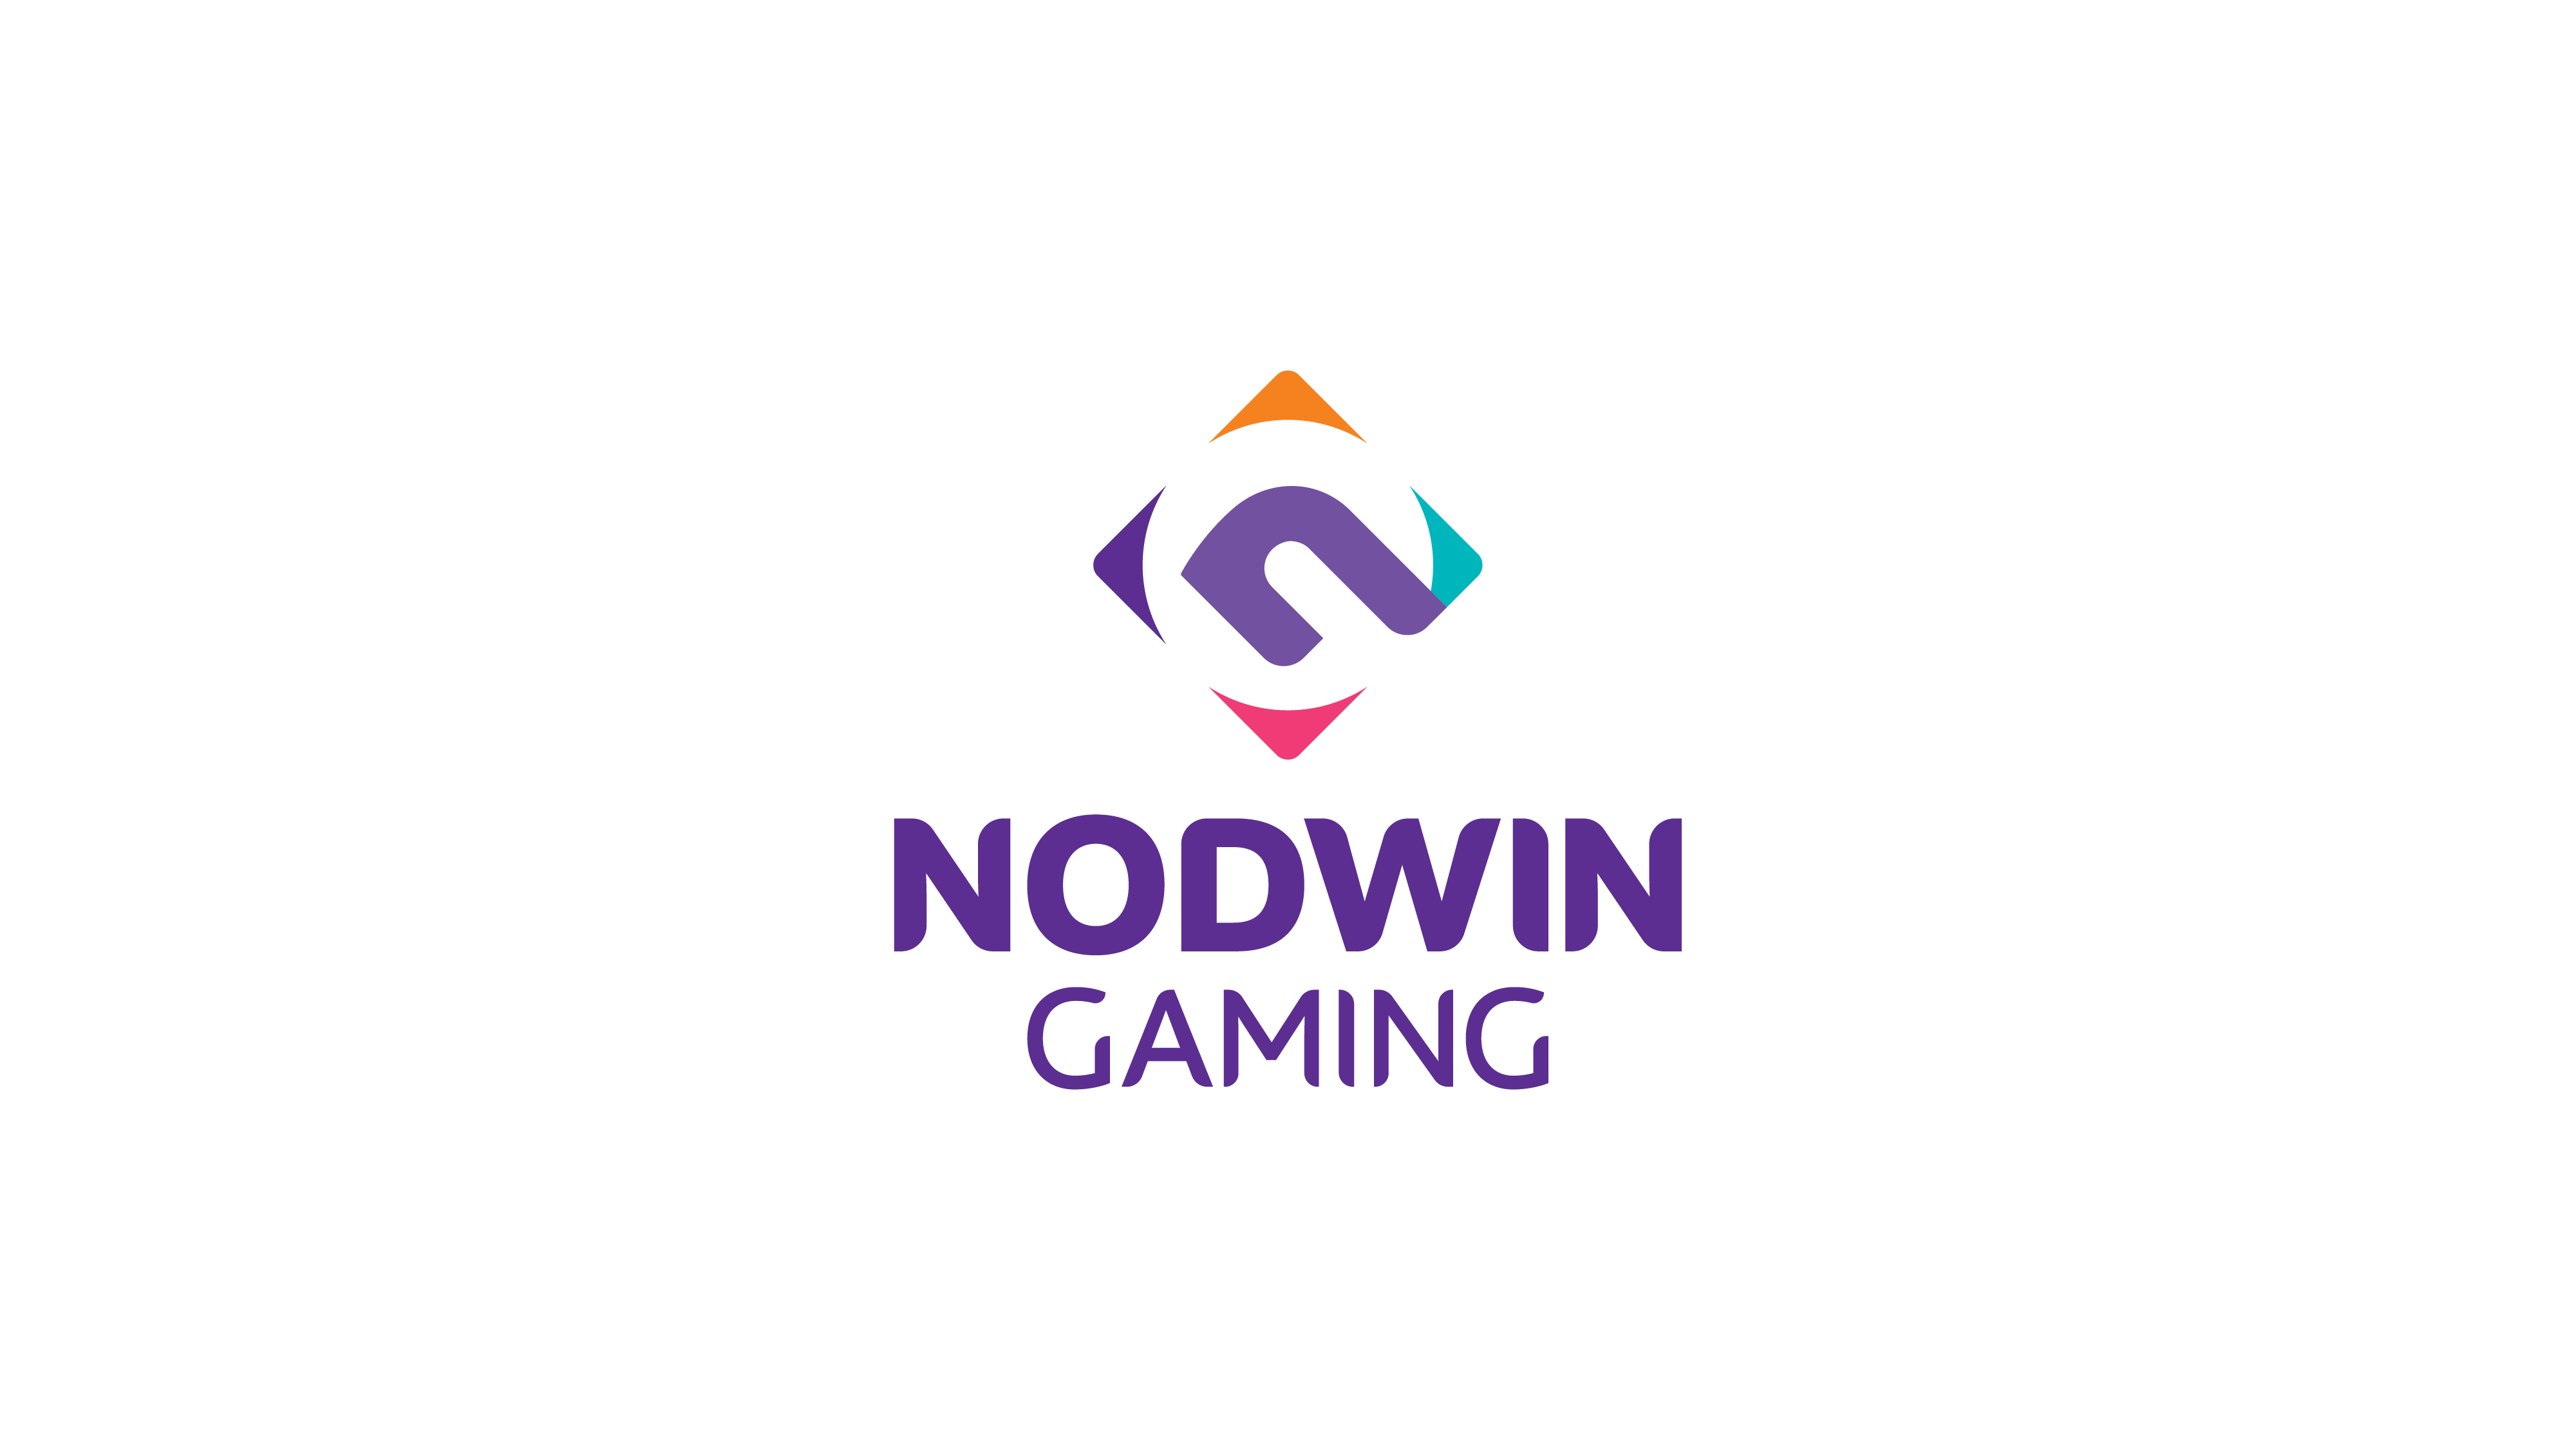 Gameloft For Brands & NODWIN Gaming enter into a partnership in India; will collectively build opportunities for brands to engage around esports in racing games